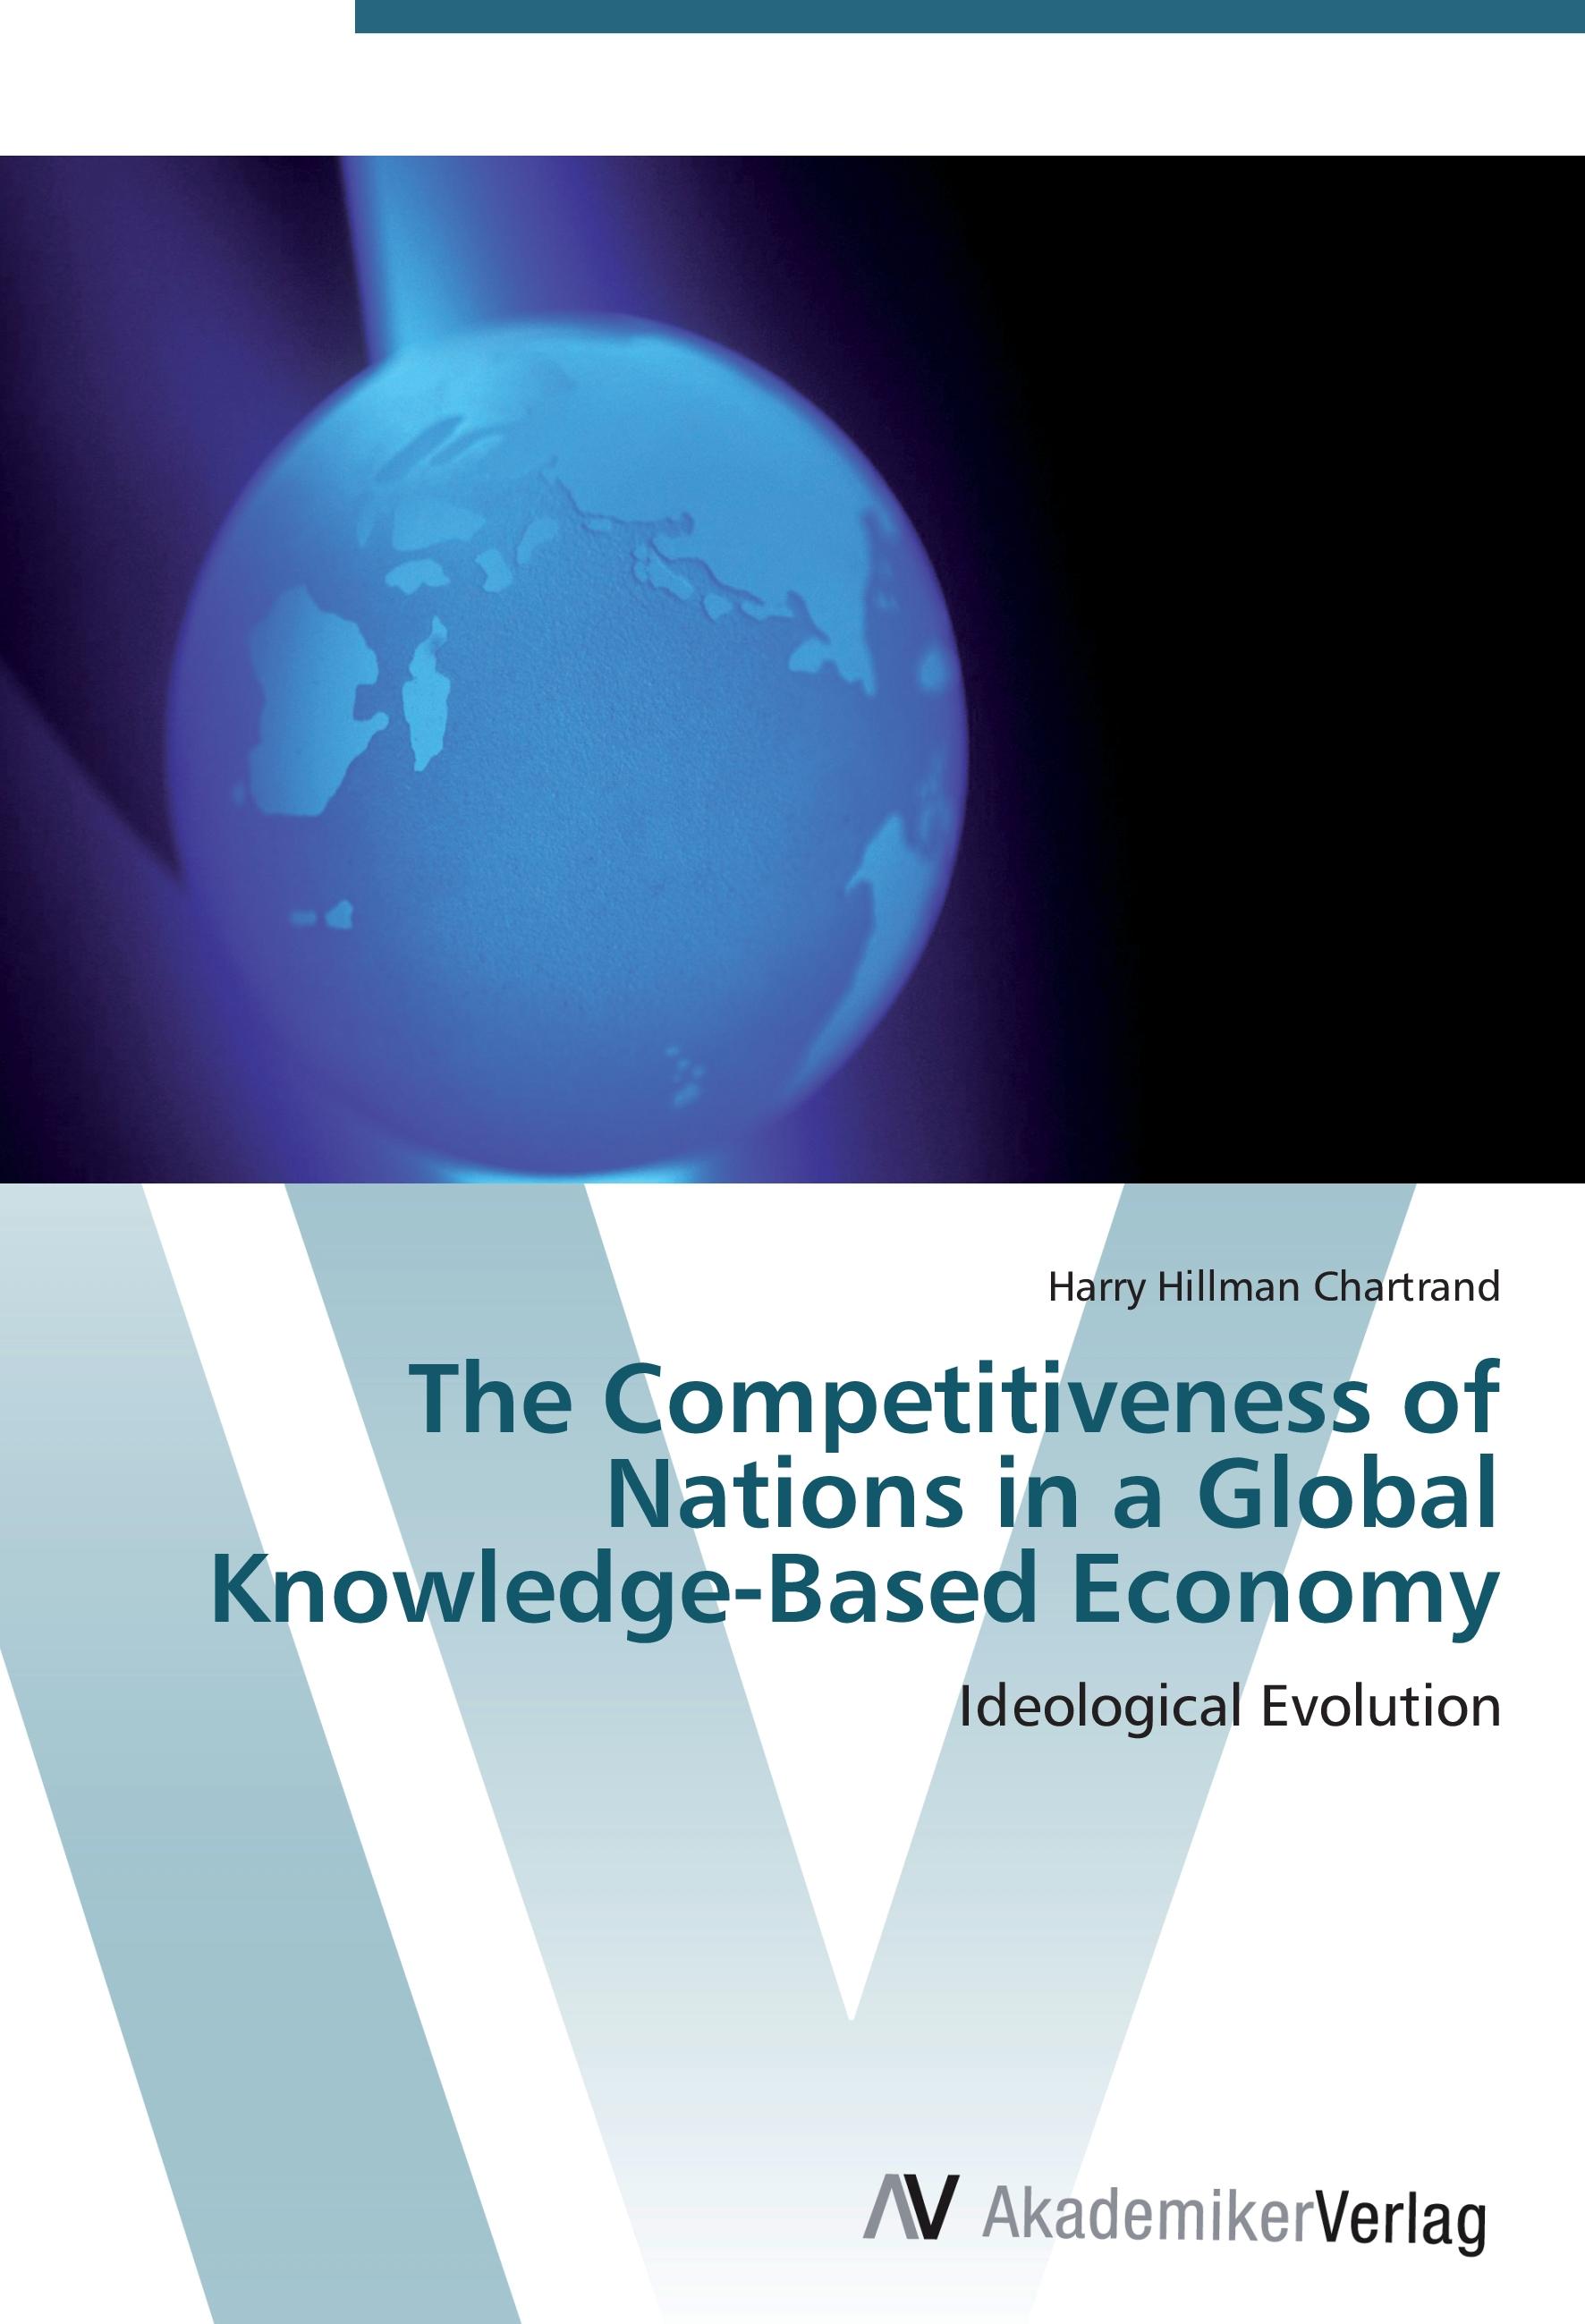 The Competitiveness of Nations in a Global Knowledge-Based Economy - Harry Hillman Chartrand